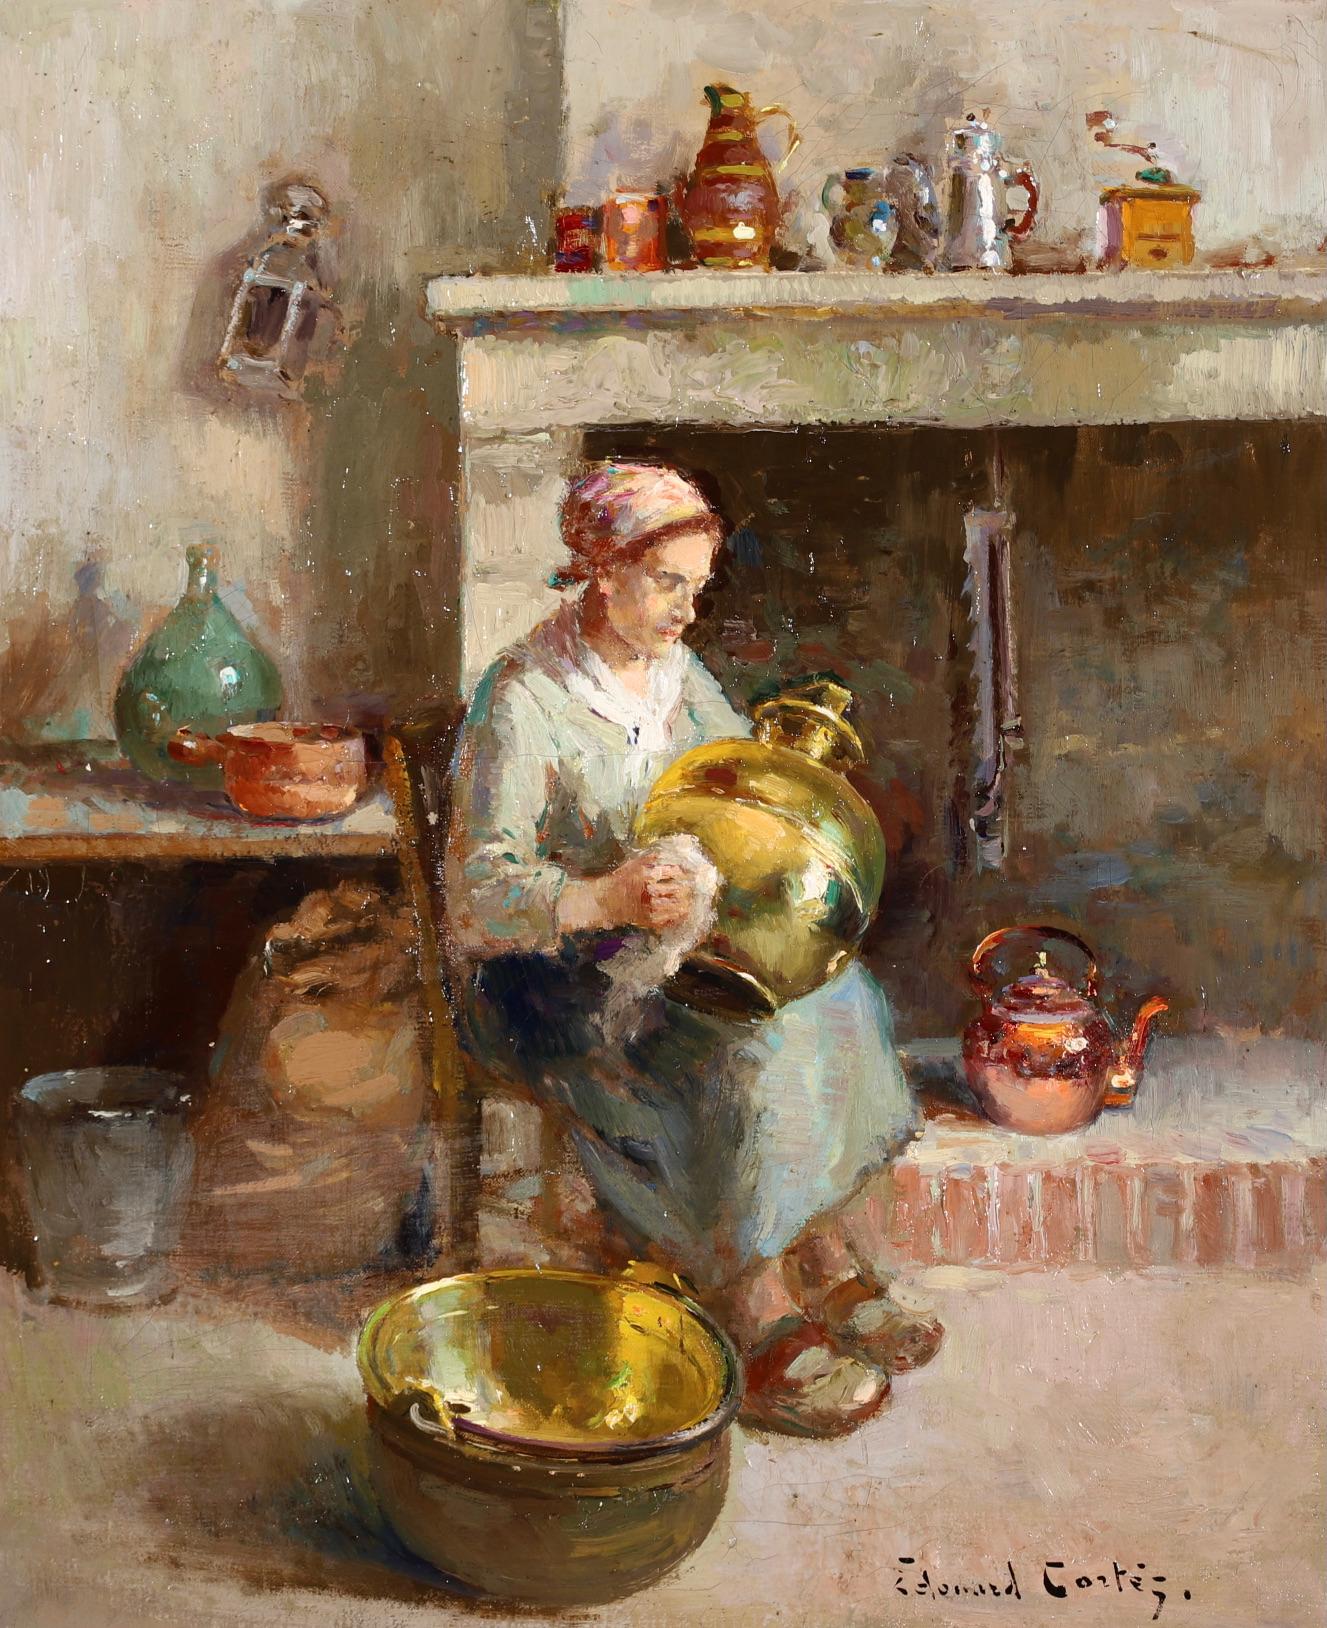 La Recureuse - Impressionist Figure in Interior Oil Painting by Edouard Cortes - Beige Interior Painting by Édouard Leon Cortès